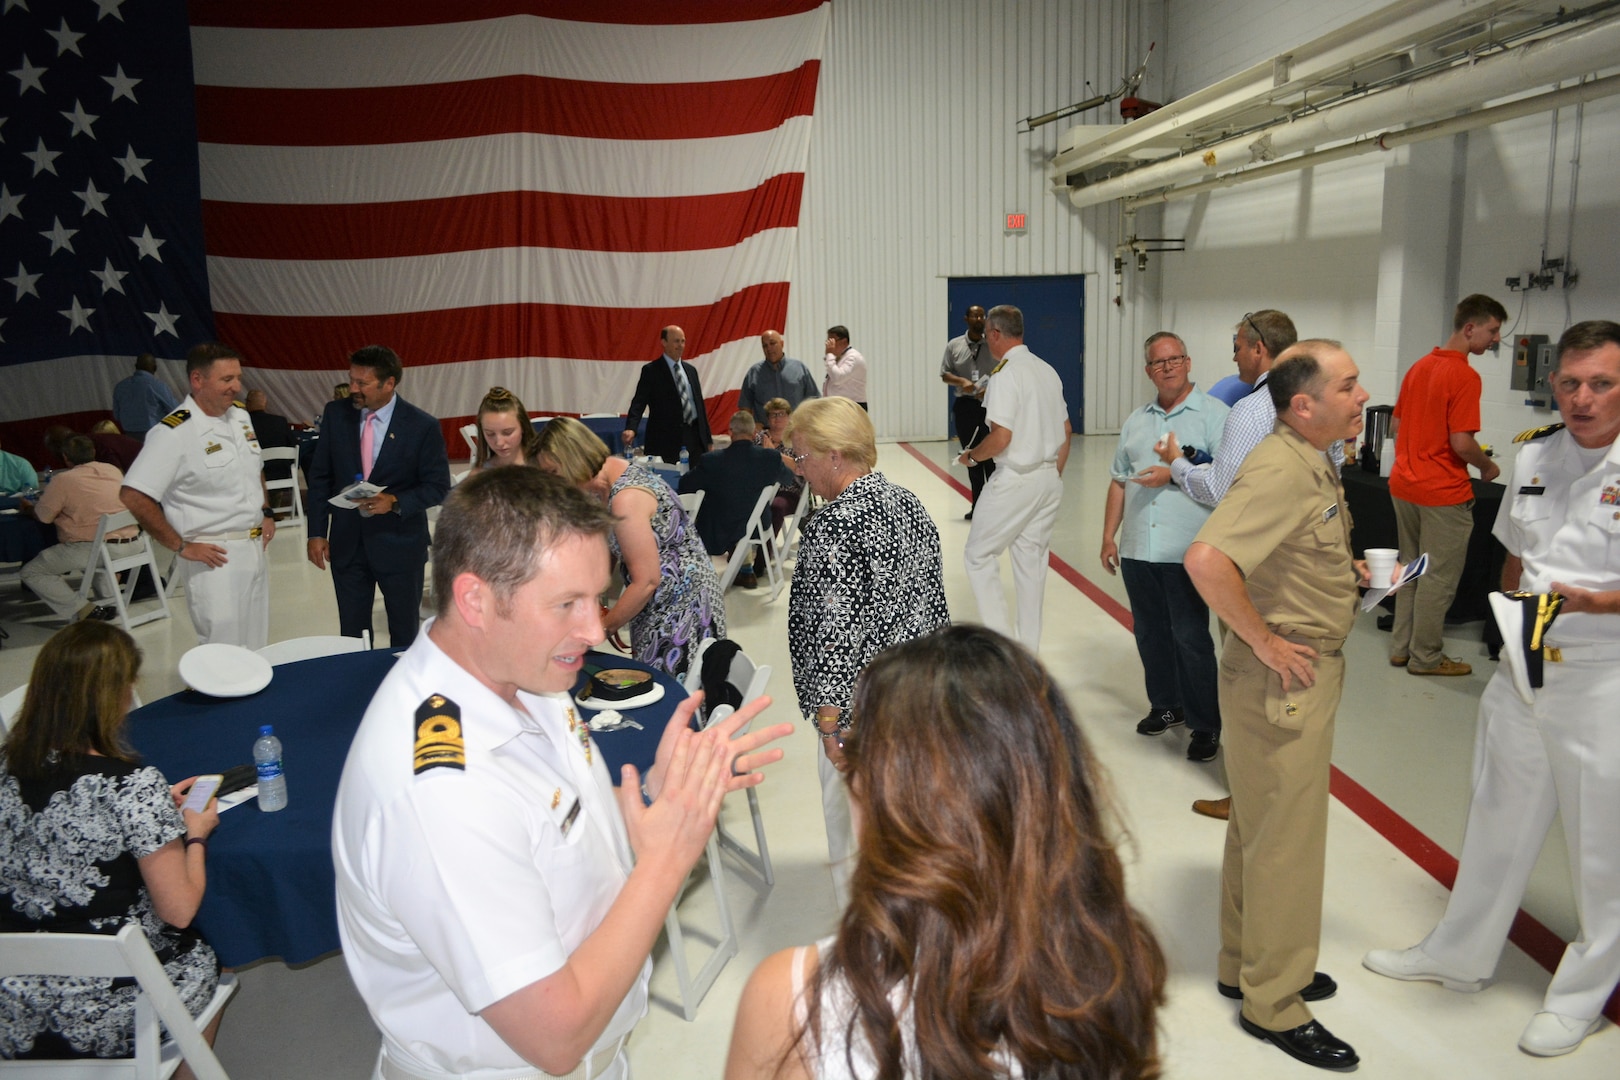 IMAGE: Guests enjoy cake, refreshments and conversations following Naval Surface Warfare Center Dahlgren Division, Dam Neck Activity’s Change of Command ceremony June 27. More than 200 Sailors and guests attended a traditional ceremony at CNATTU’s ceremonial hangar aboard NAS Oceana where Cmdr. Andrew Hoffman was relieved of command by Cmdr. Joseph Oravec, who became the command’s 28th commanding officer.